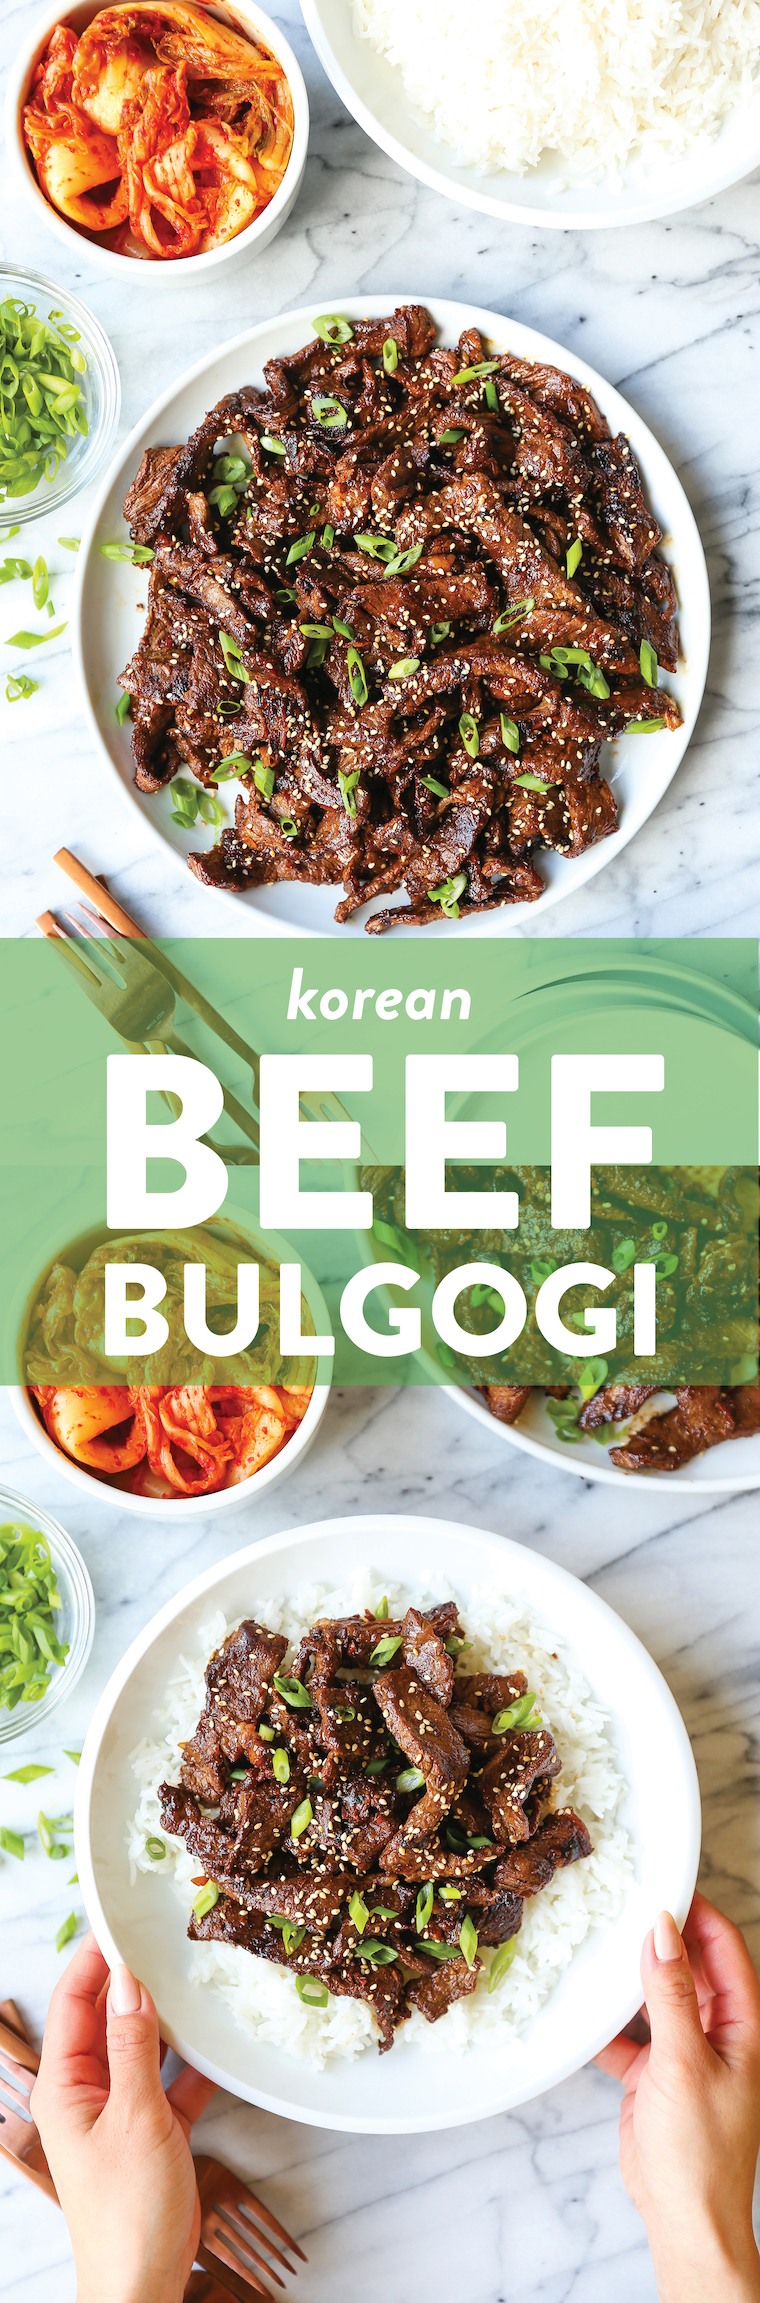 Korean Beef Bulgogi - A super easy recipe for Korean BBQ beef with the most flavorful marinade! The thin slices of meat cook quickly, and it's so tender!!!